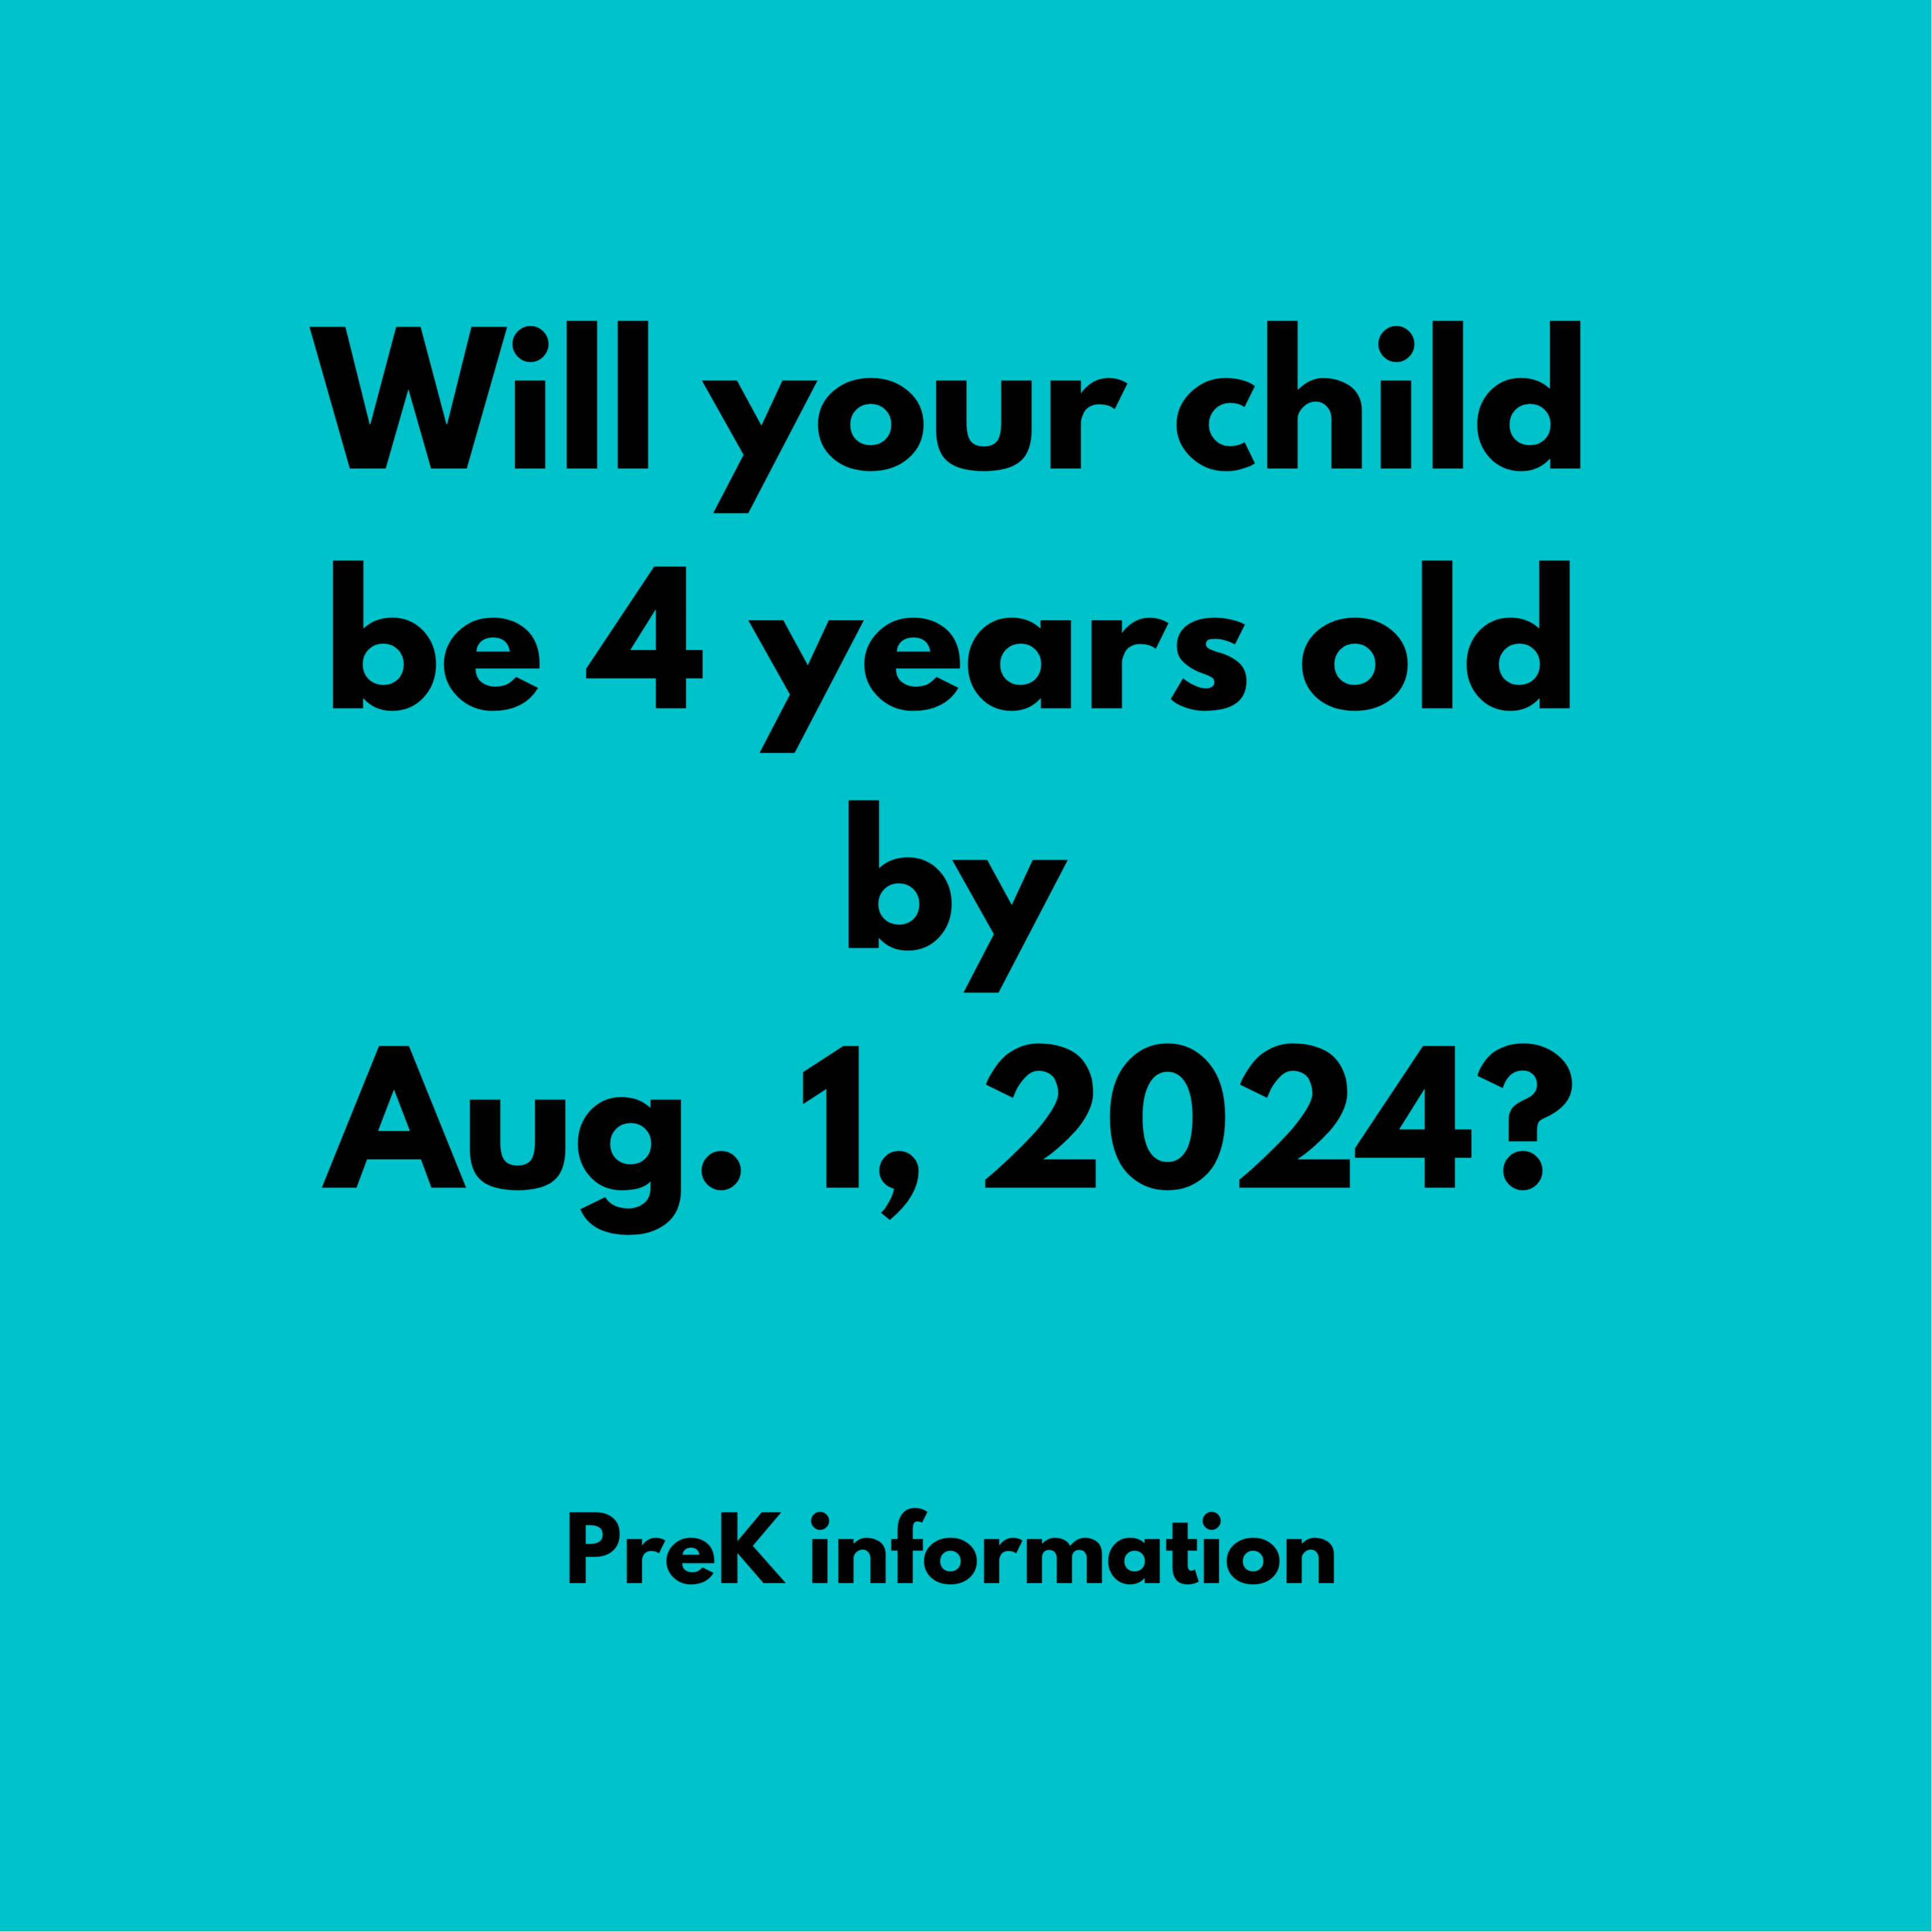 Will your child be 4 years old by Aug. 1 2022?